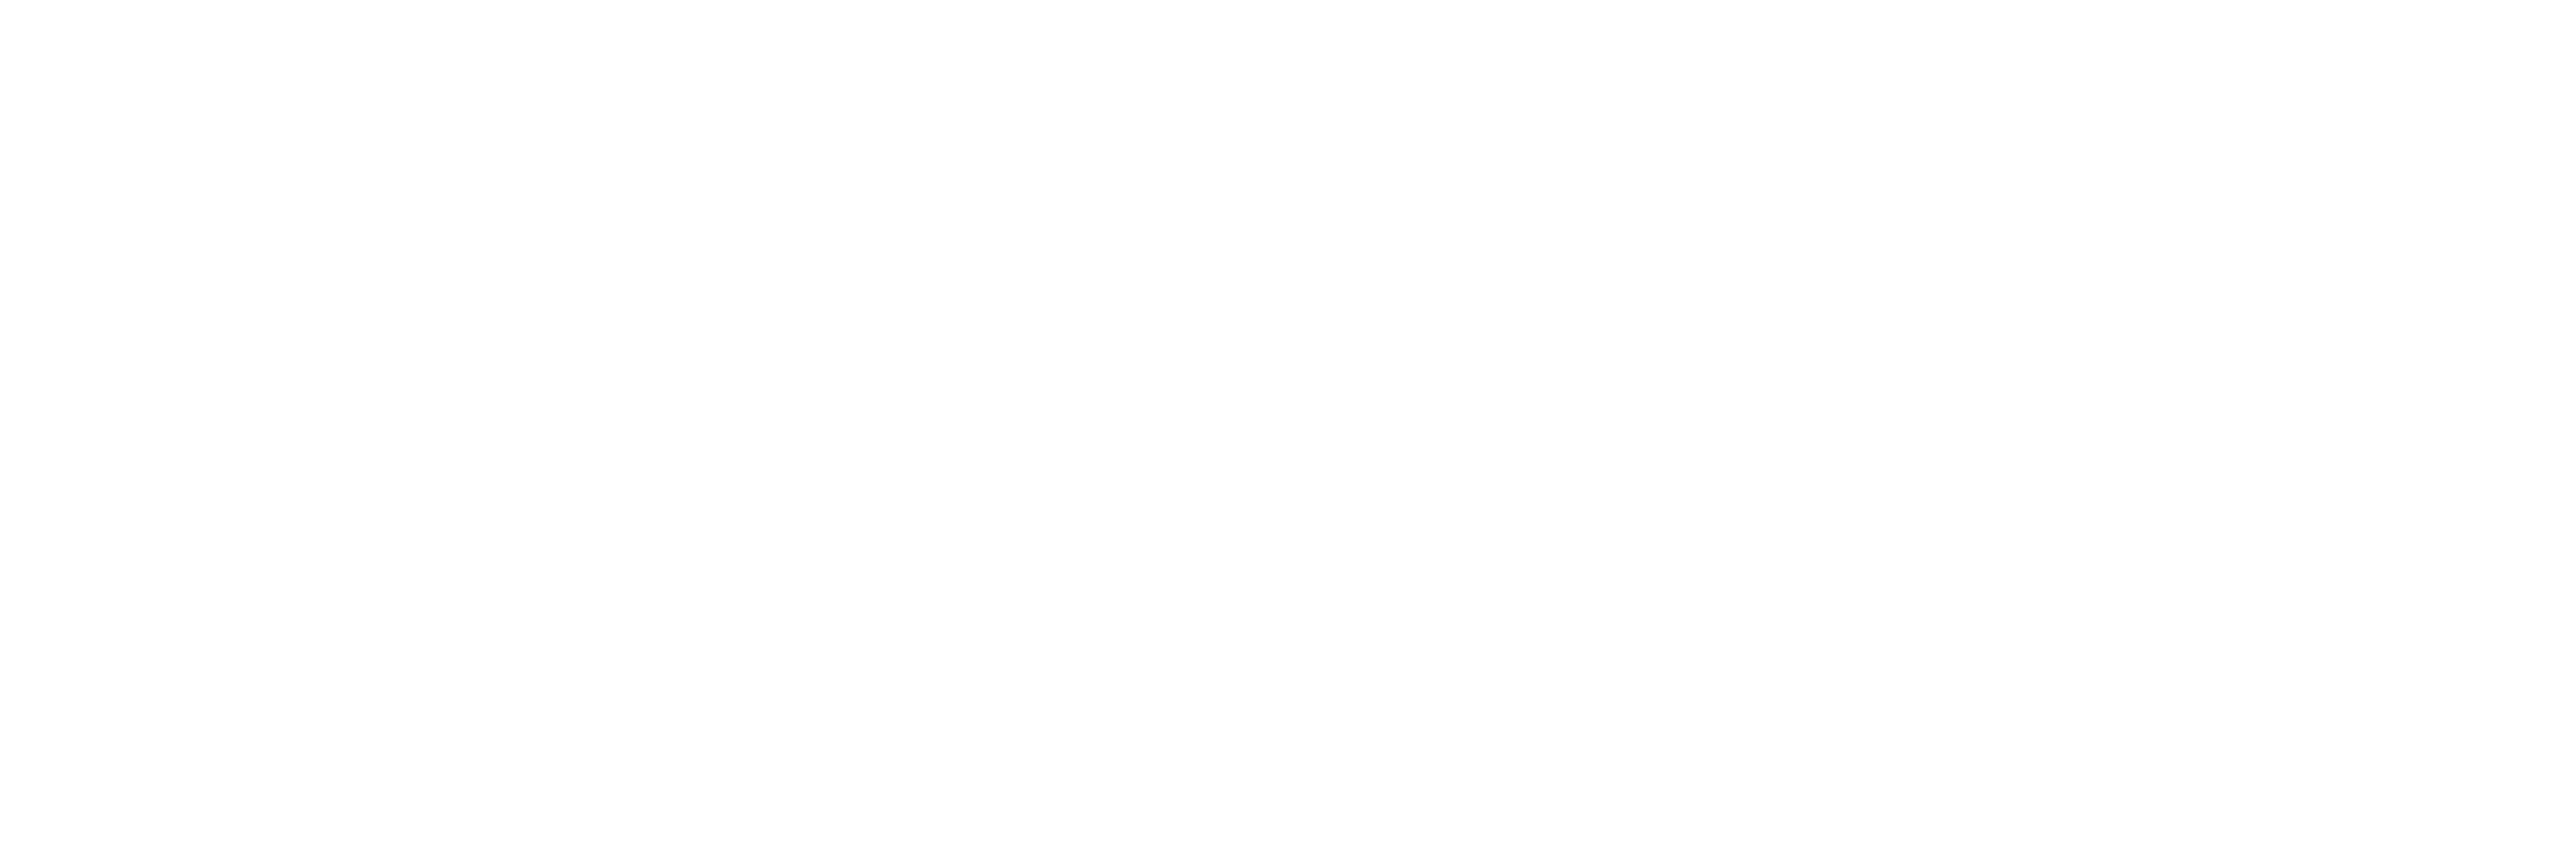 college of agriculture, forestry and life sciences clemson university